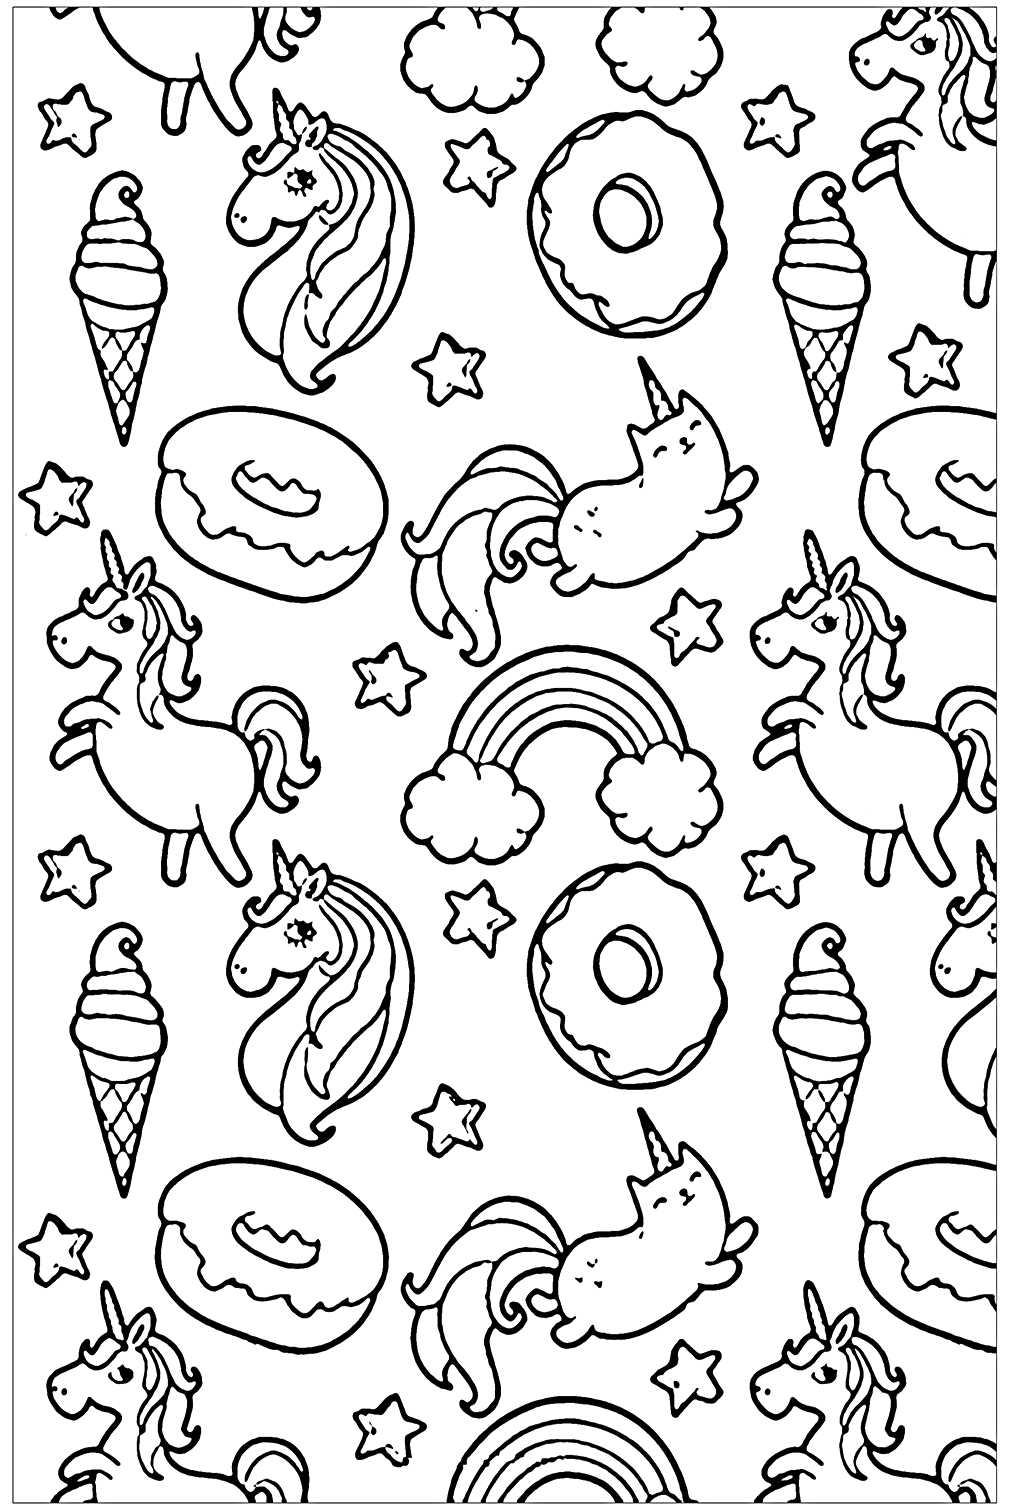 Donut 8Unicorn Donut Coloring Page from Donut